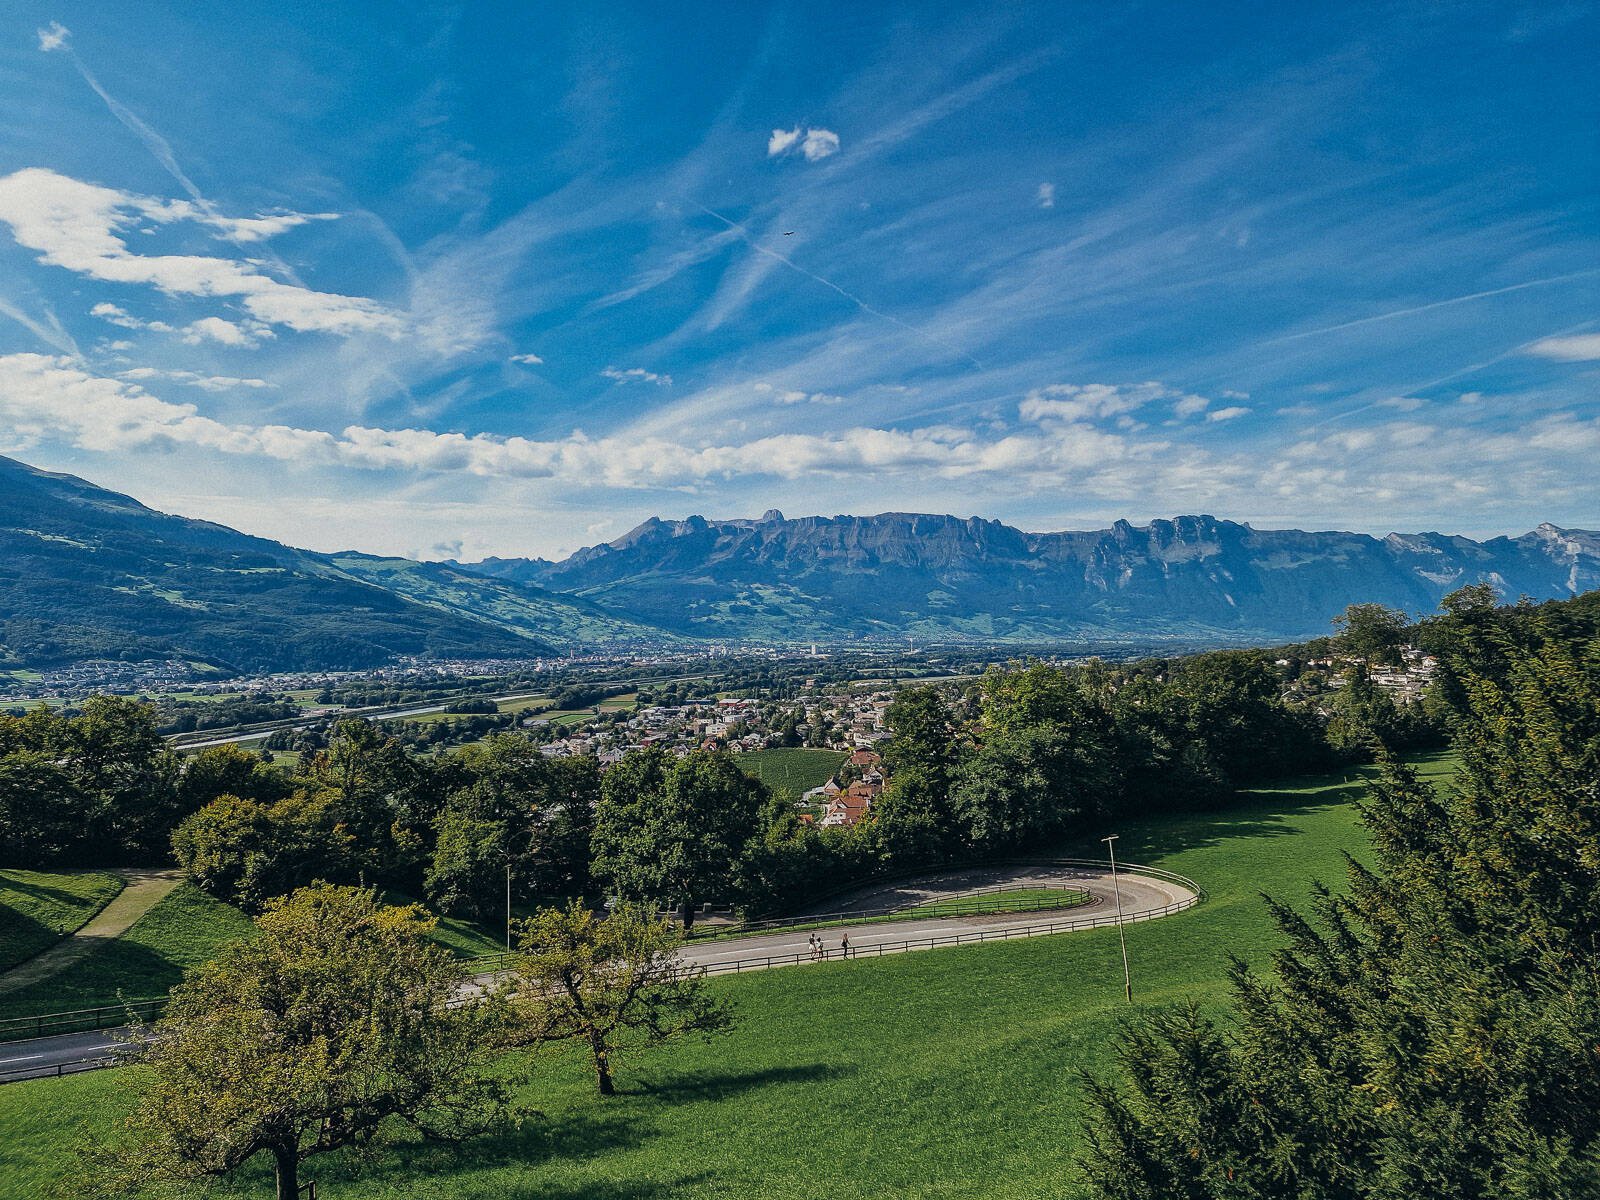 Panoramic image of Liechtenstein with lush green grass in the foreground, trees and a town in the distance with large mountains behind and blue sky